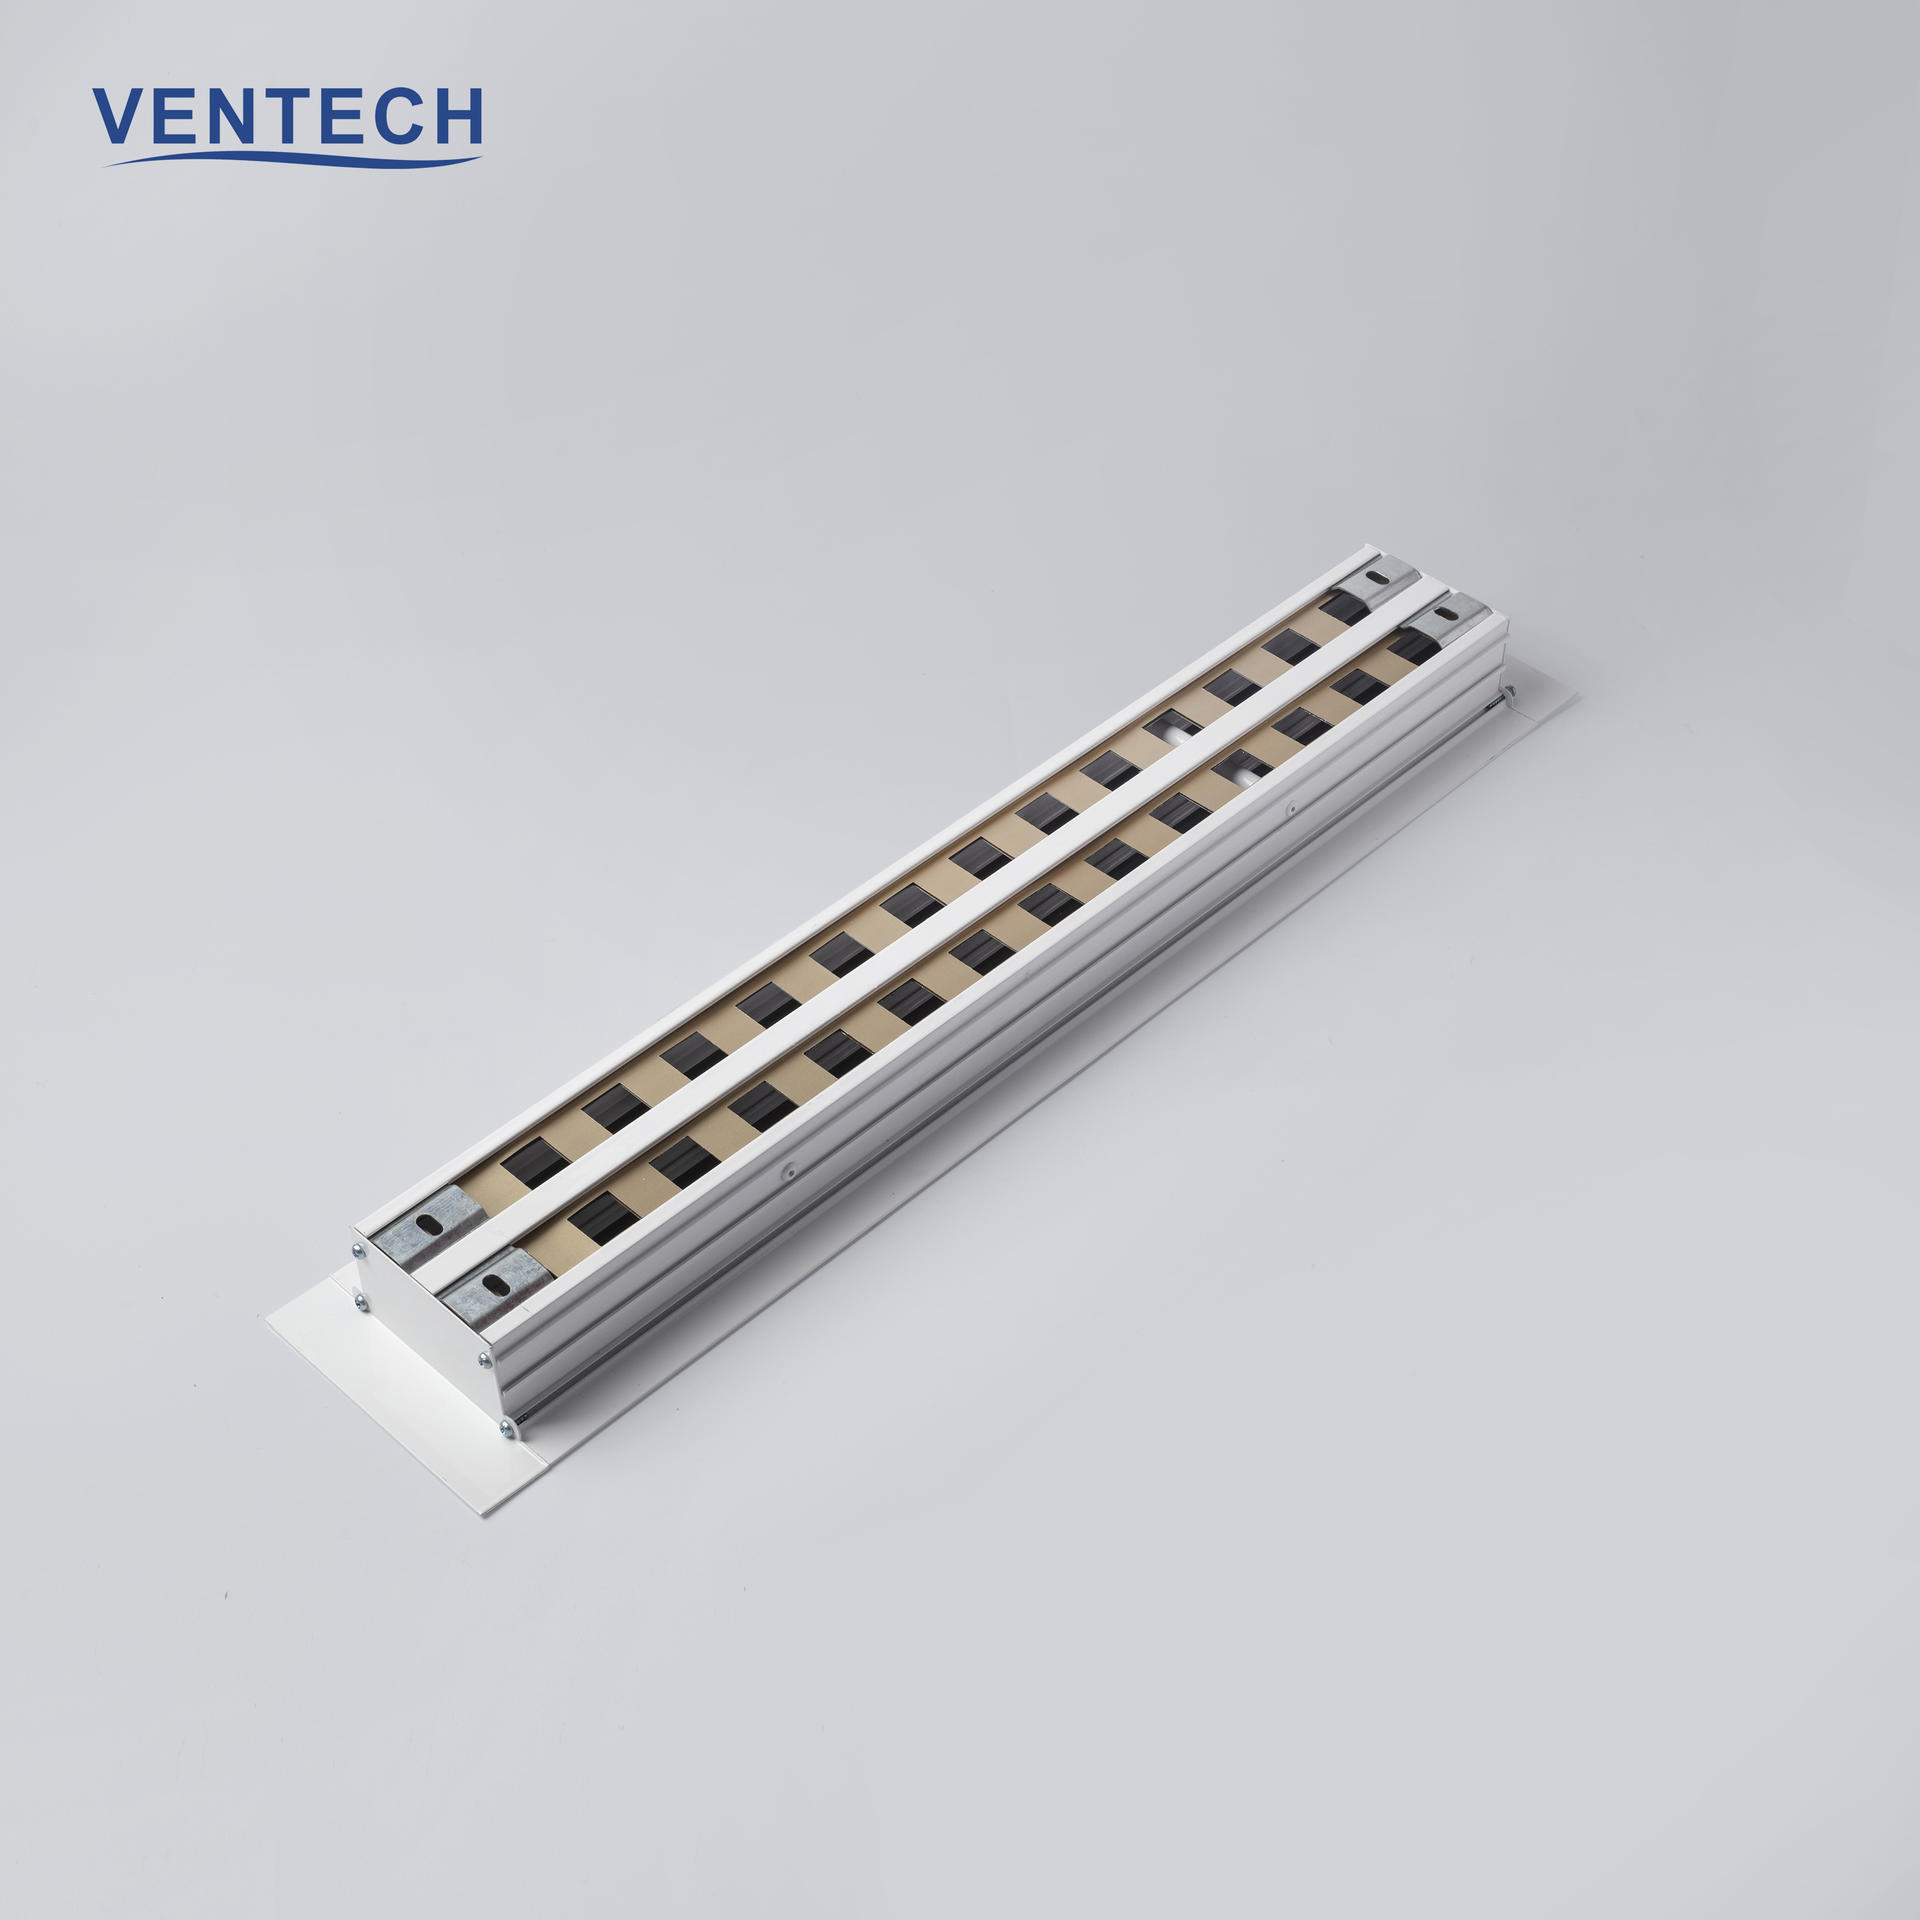 HAVC Aluminum Exhaust Ventilation Conditioning Supply Air Intake Linear Slot Ceiling Air Duct VAV Diffuser